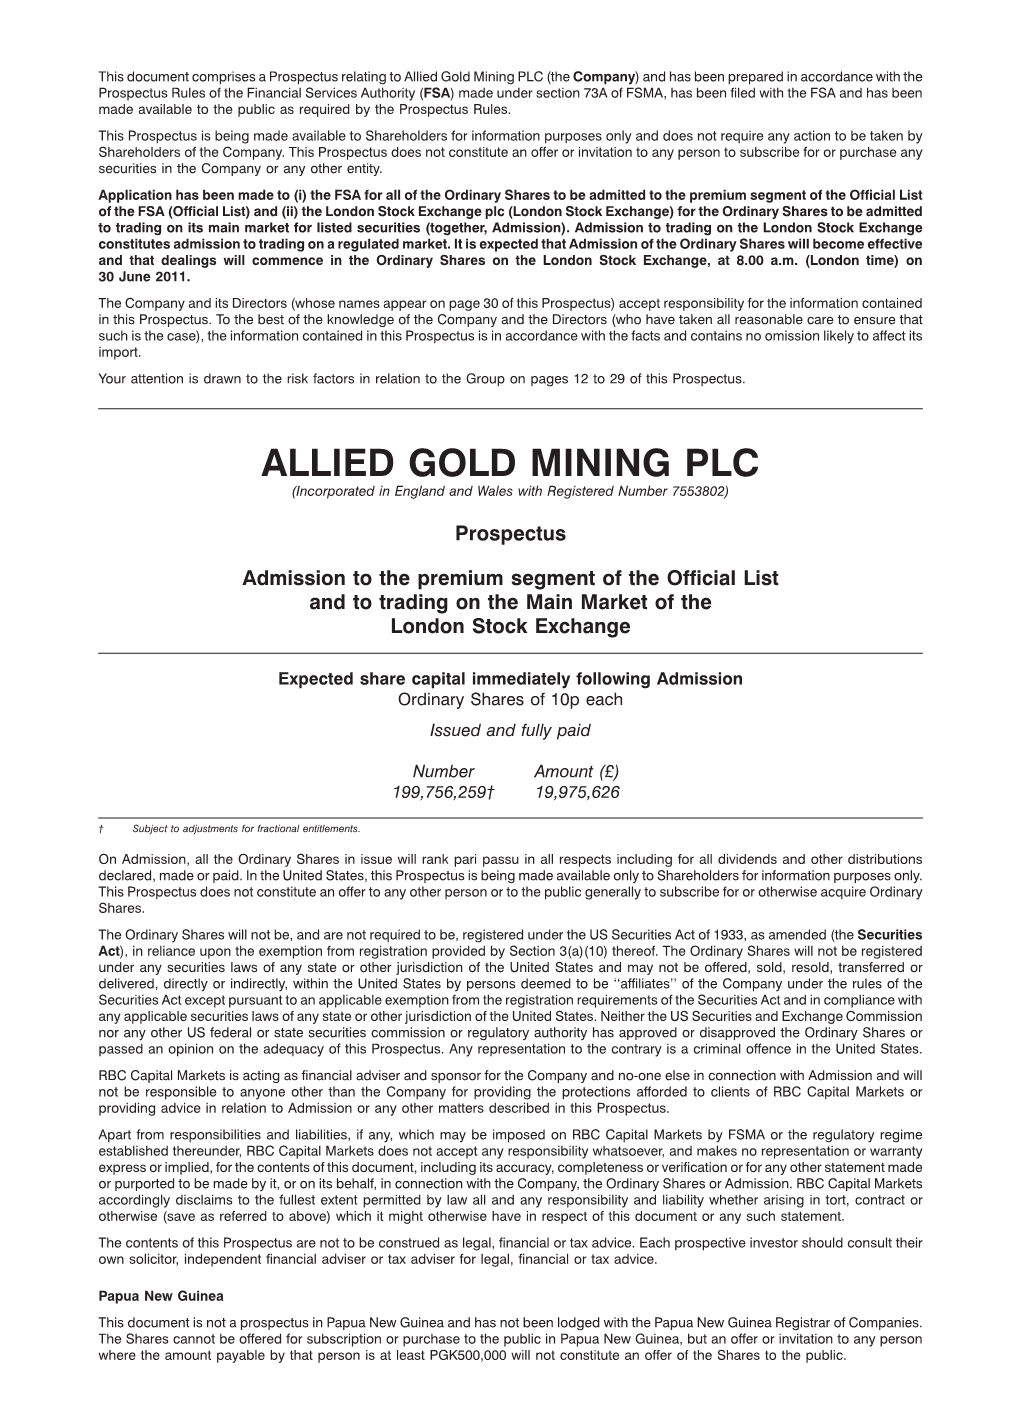 Allied Gold Mining